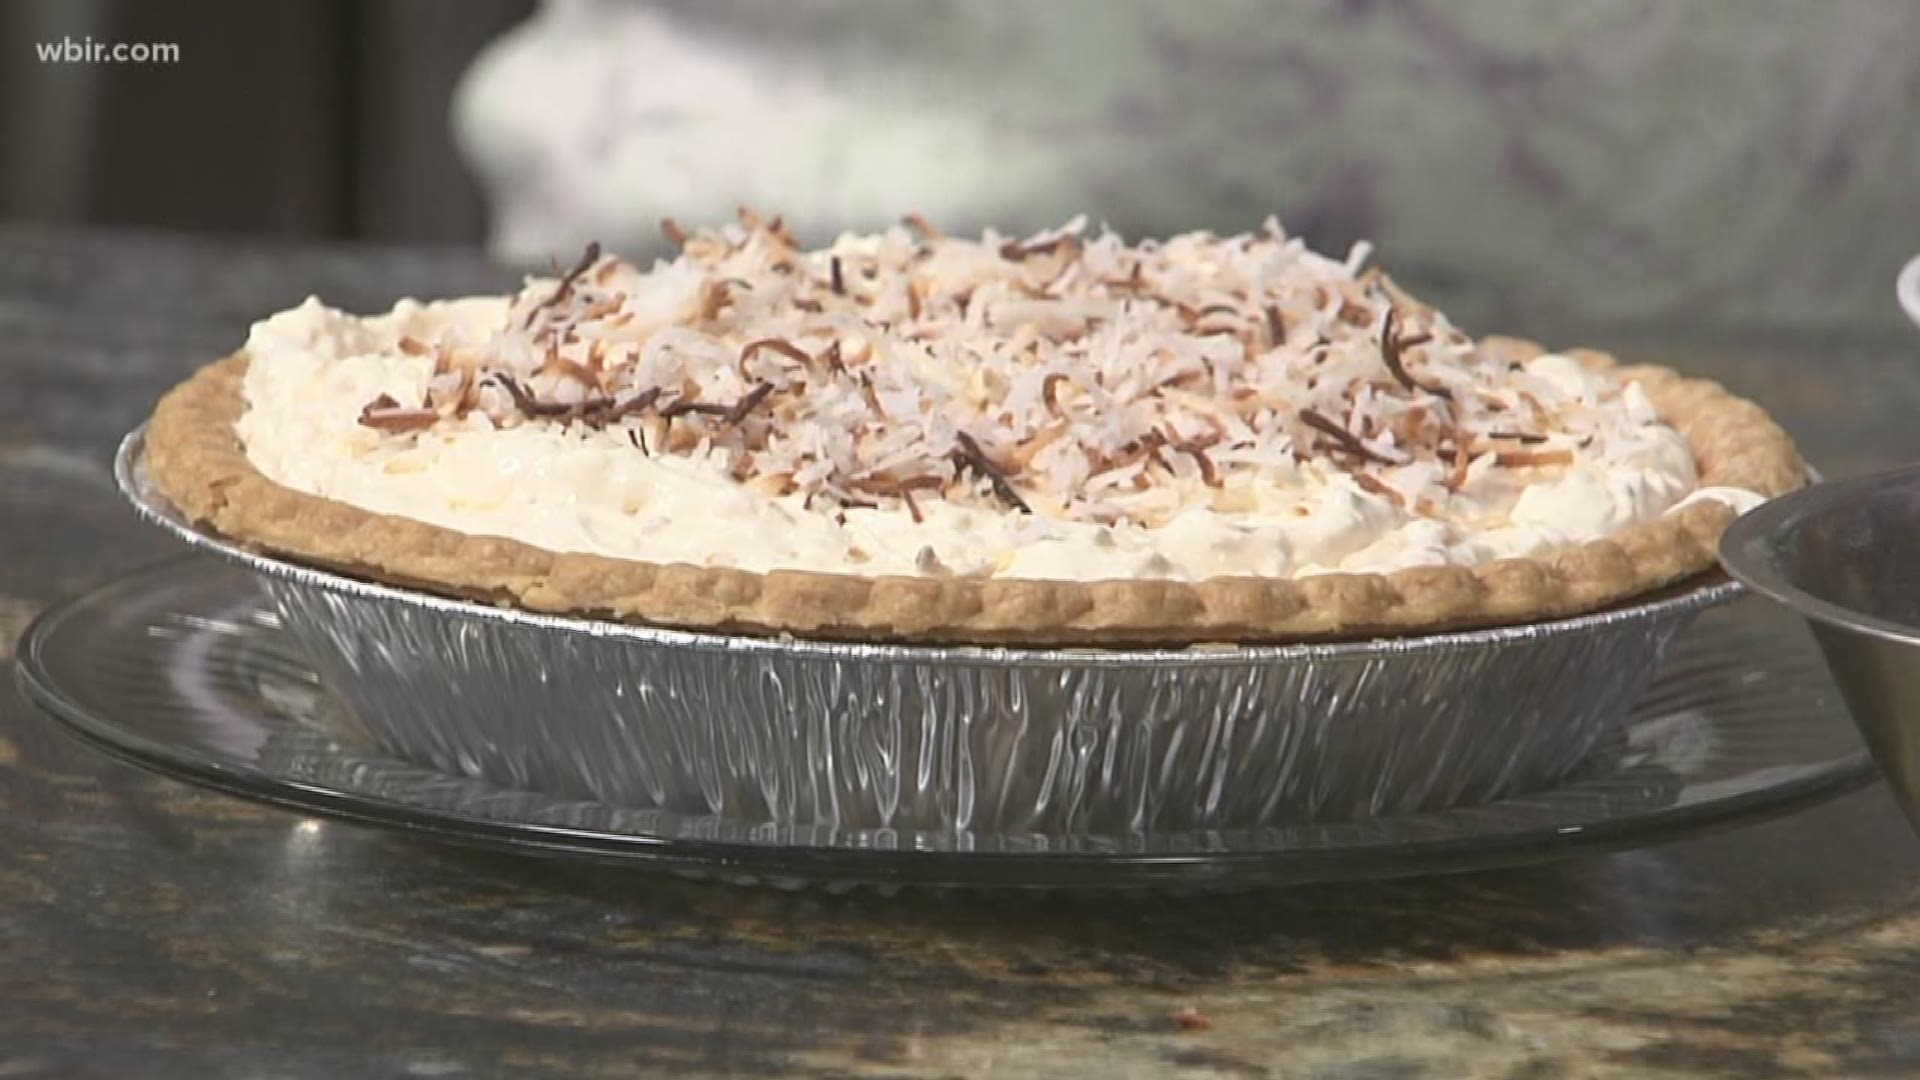 Melissa Graves from Donna's Old Town Cafe is making a coconut cream pie today. She says it's been a hit at the restaurant.